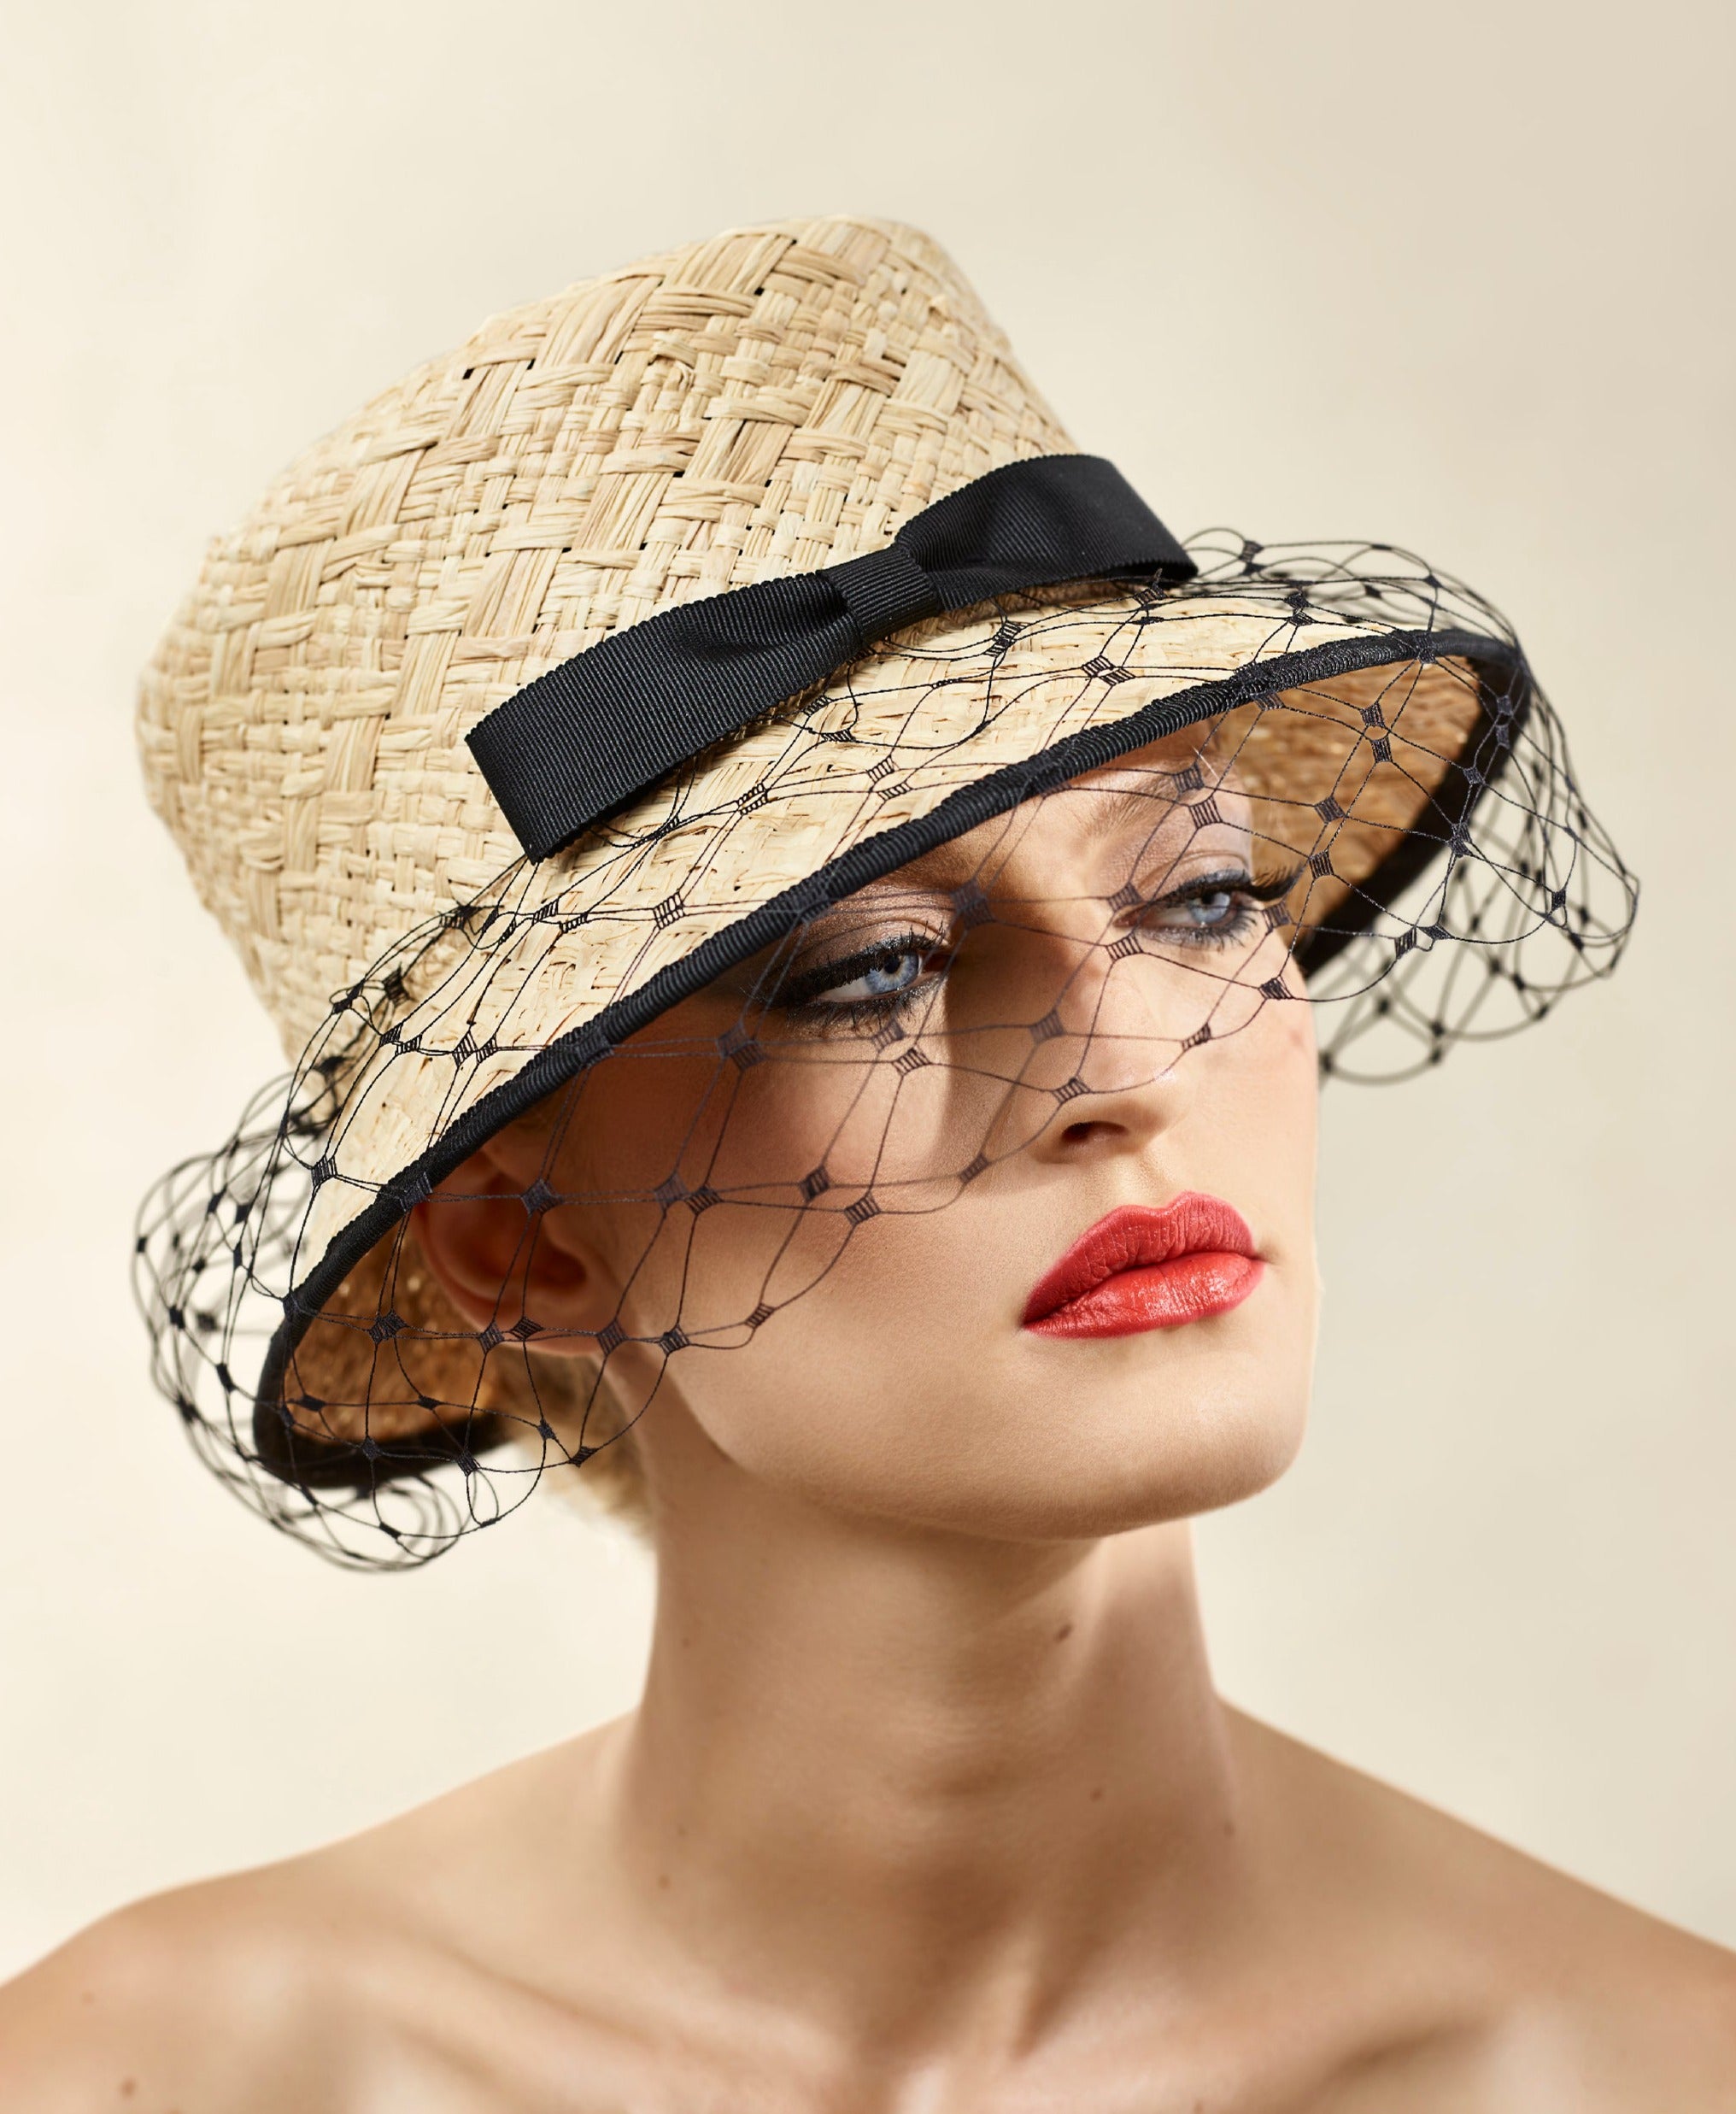 Misa Harada Hats| LUCILLE | Bucket hat in natural fancy raffia, wrapped with a black veil and grosgrain bow